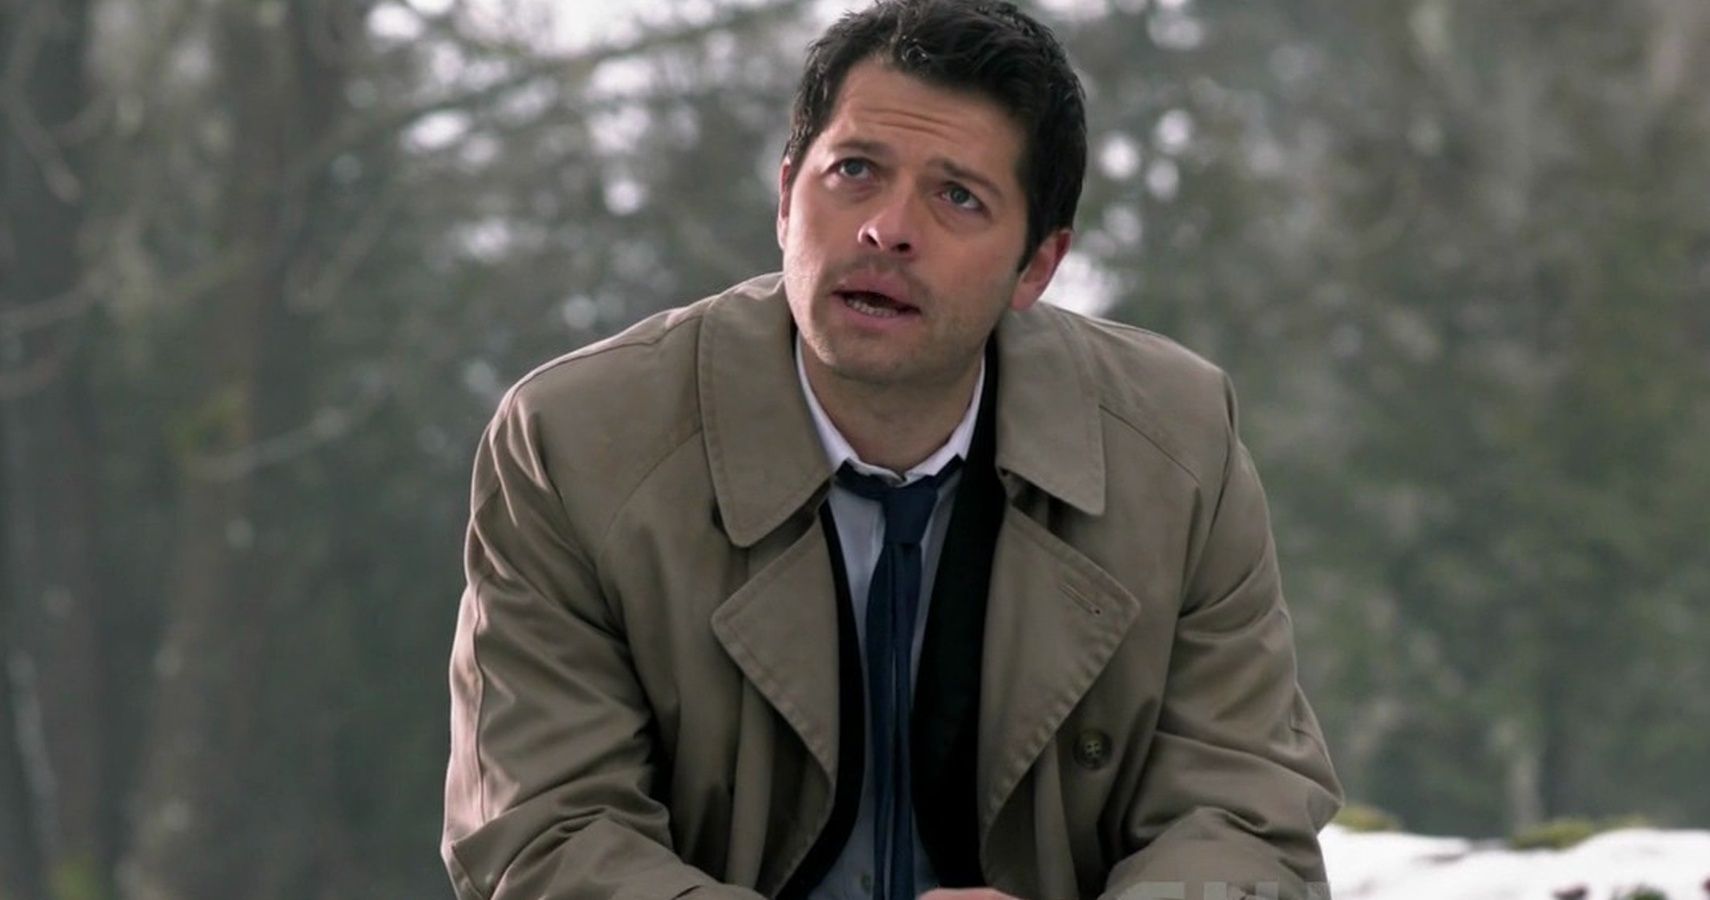 Supernatural 10 Characters Castiel Should Have Been With (Other Than Meg)